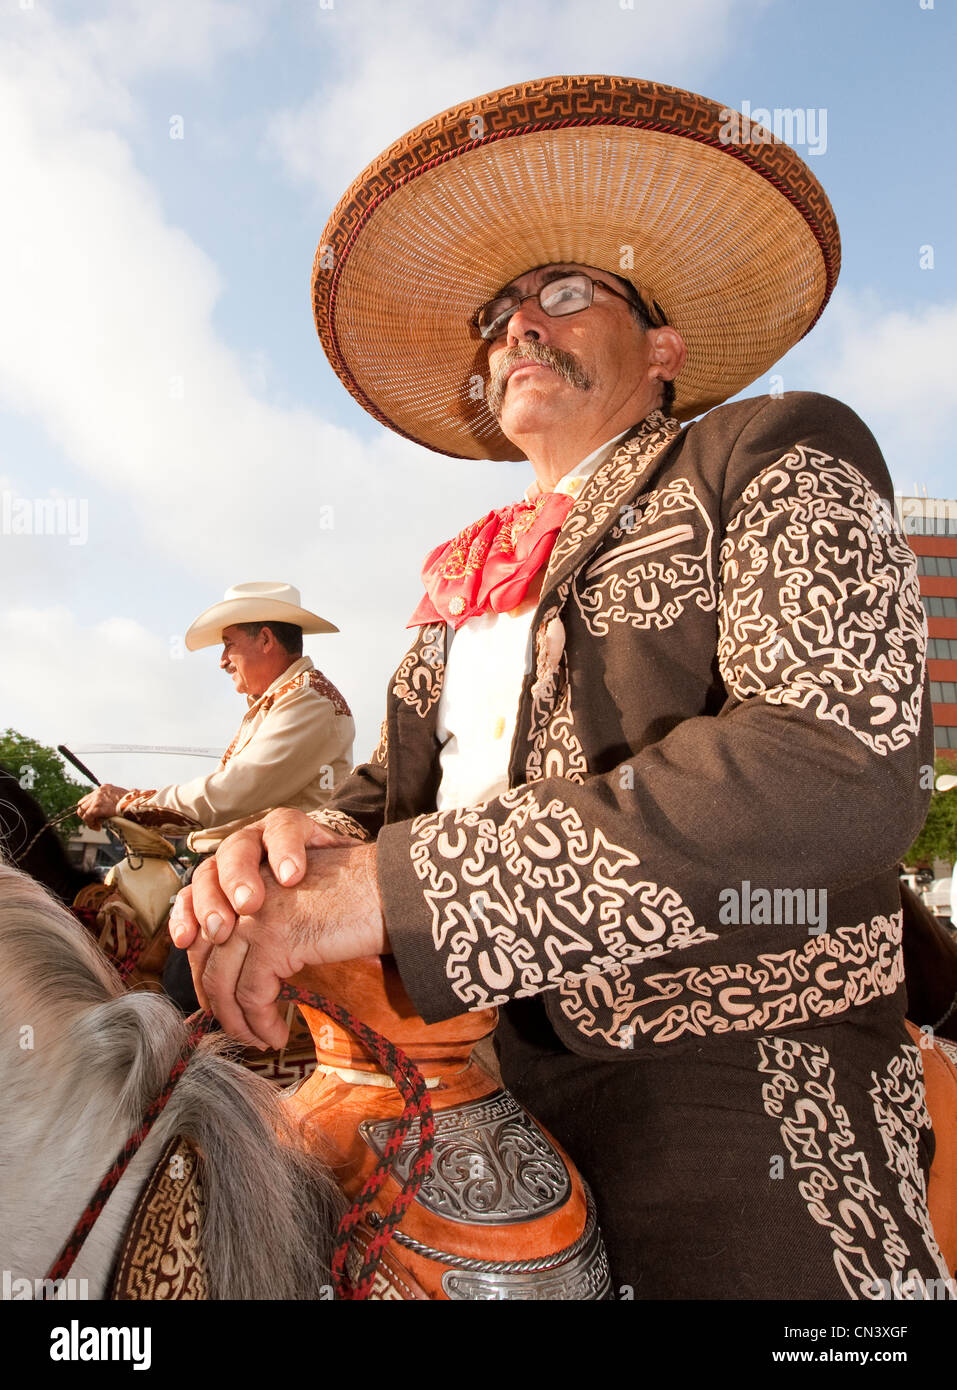 Male dressed up as a Charro, traditional horseman from Mexico rides horse during parade in Austin, Texas Stock Photo